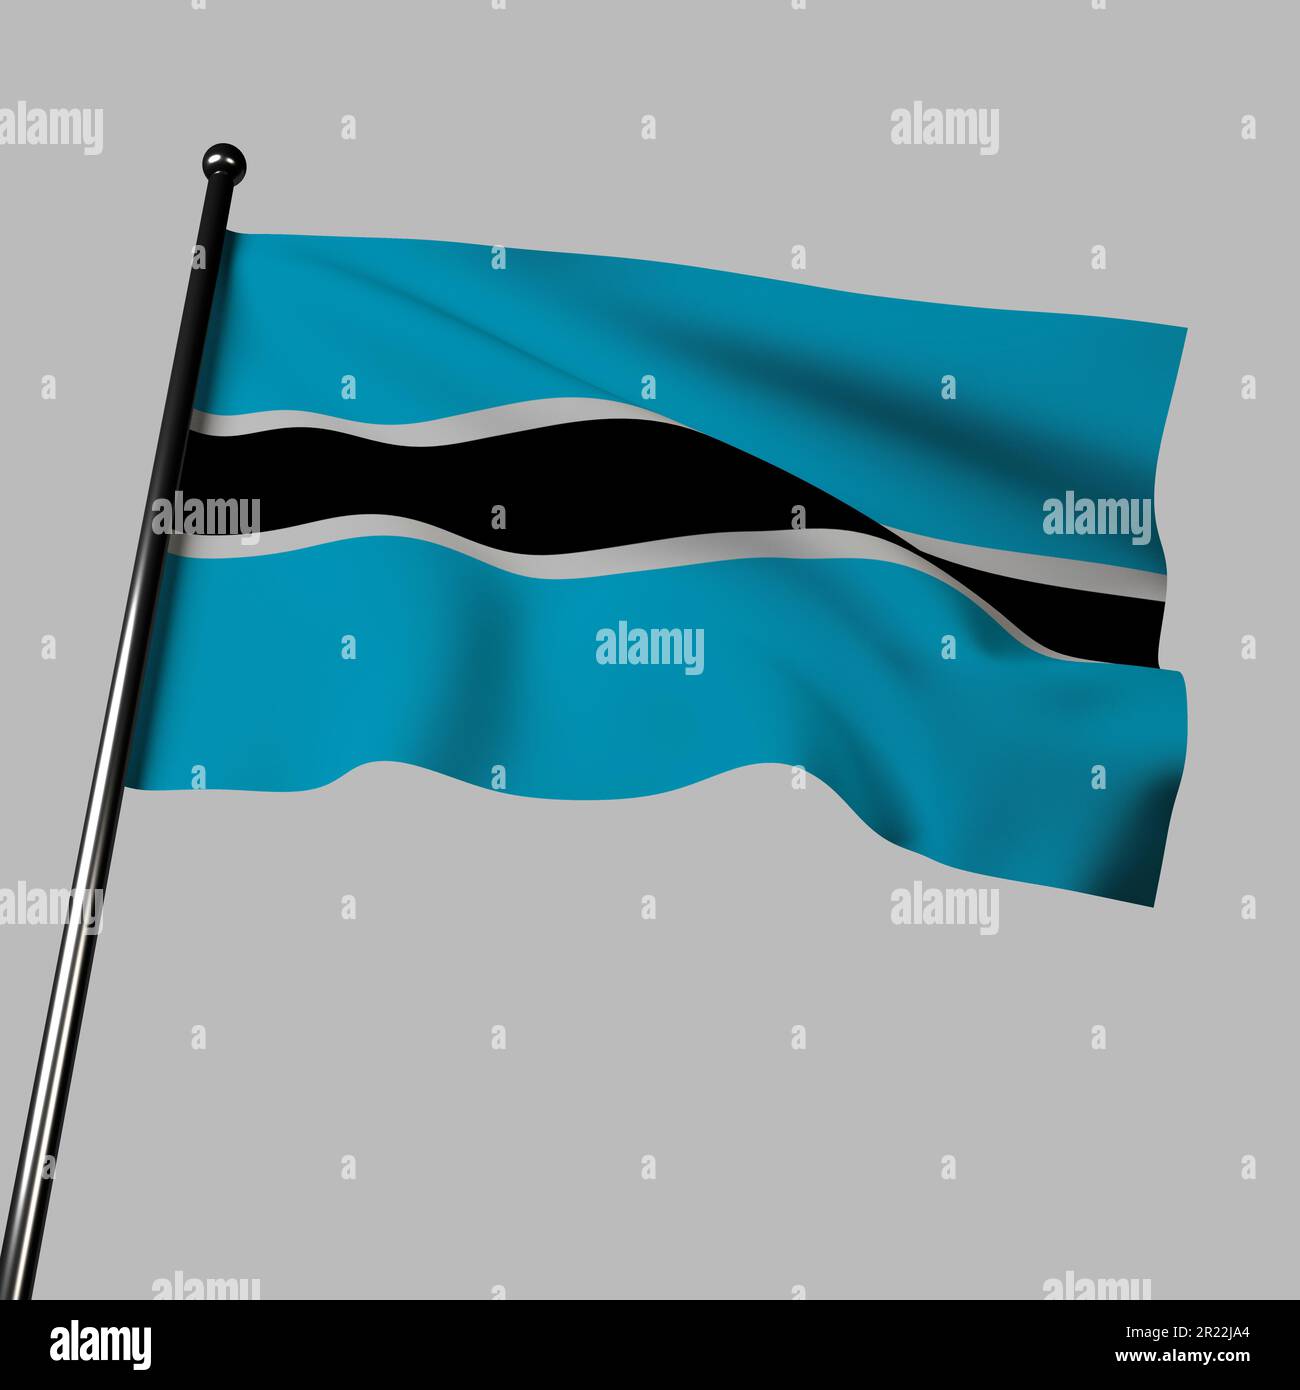 This 3D render depicts the flag of Botswana waving on a gray background. The flag features a light blue background with a black vertical stripe and a Stock Photo